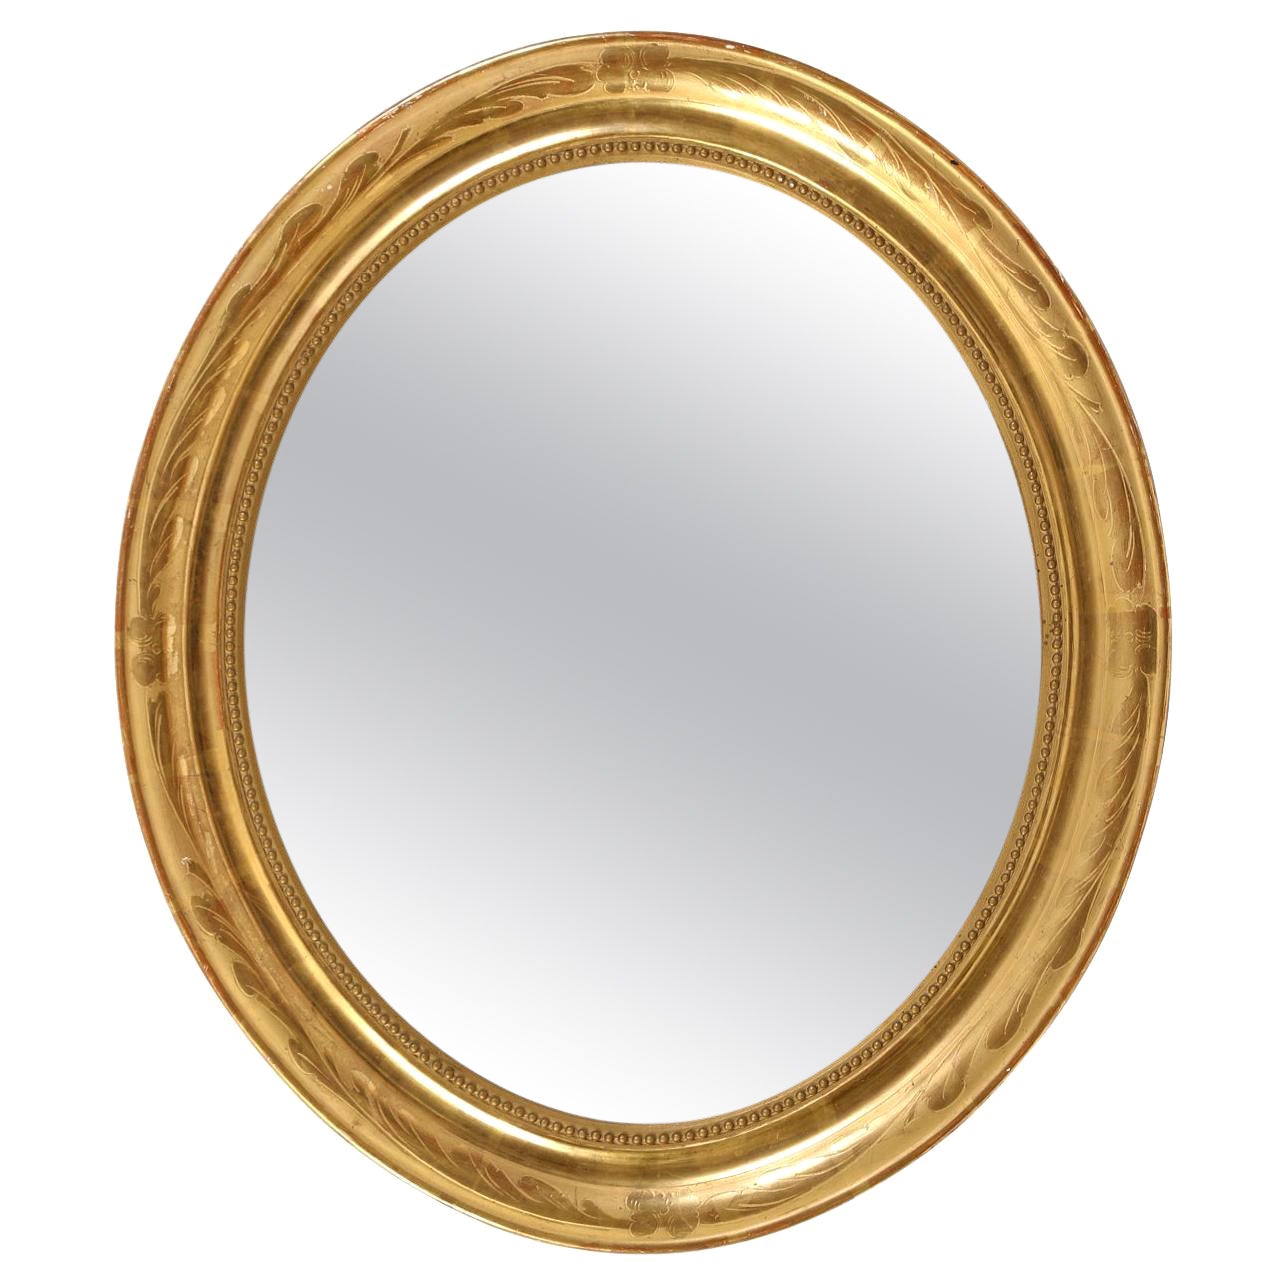 An Oval Giltwood Mirror with Inner Beading Molding For Sale